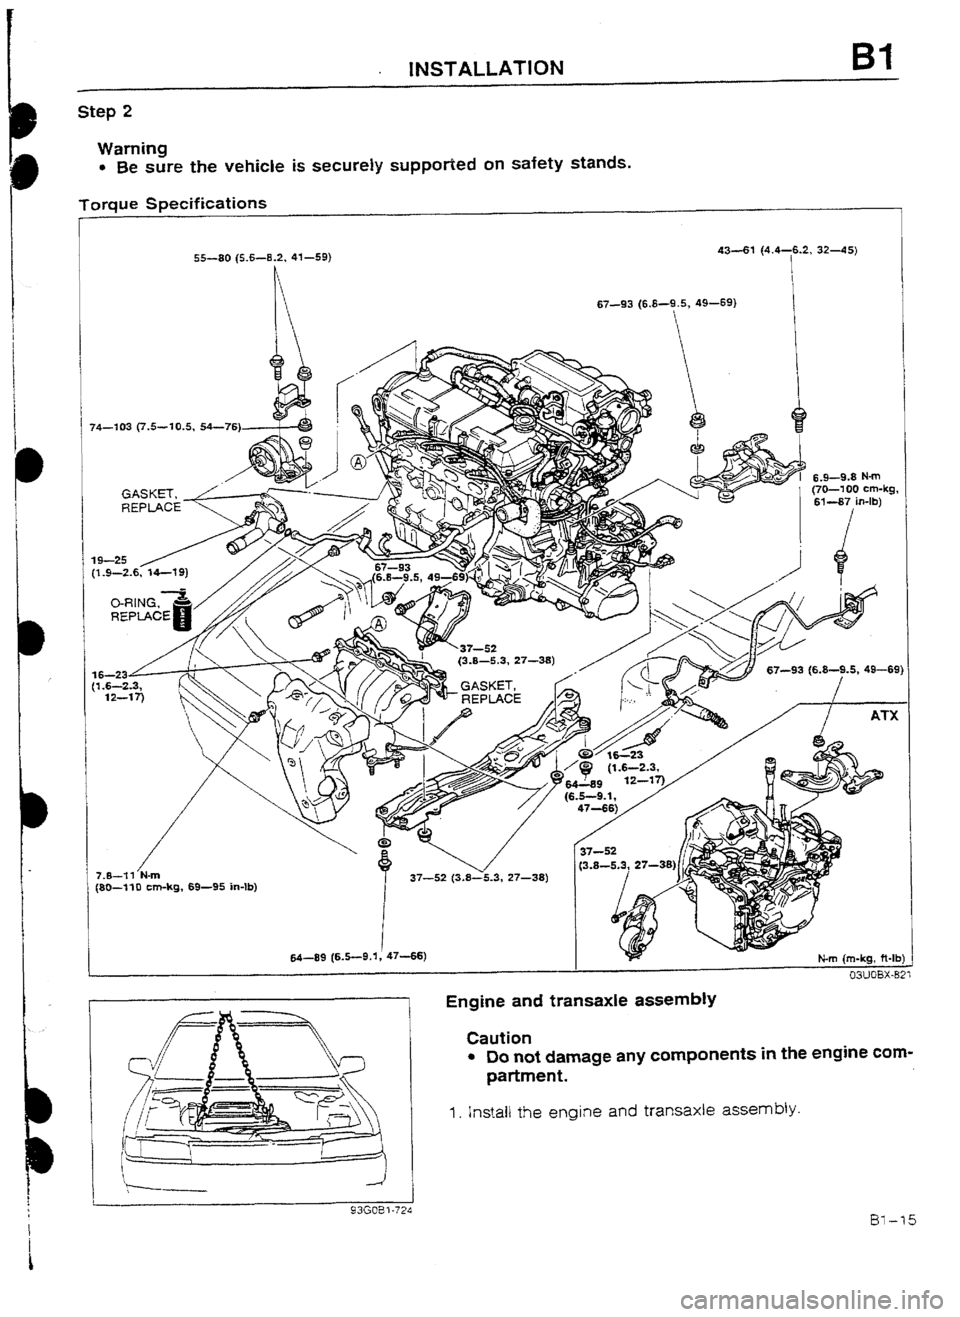 MAZDA 232 1990   Suplement Service Manual INSTALLATlON ES1 
Step 2 
Warning 
l Be sure the vehicle is securely suppofied on safety stands. 
Torque Specifications 
I 
I i 74-103 (7.5--10.5, 54-76) 
/ 7.8-?I N-m 
(80--flO cm-kg, 69-95 in-lb)  5